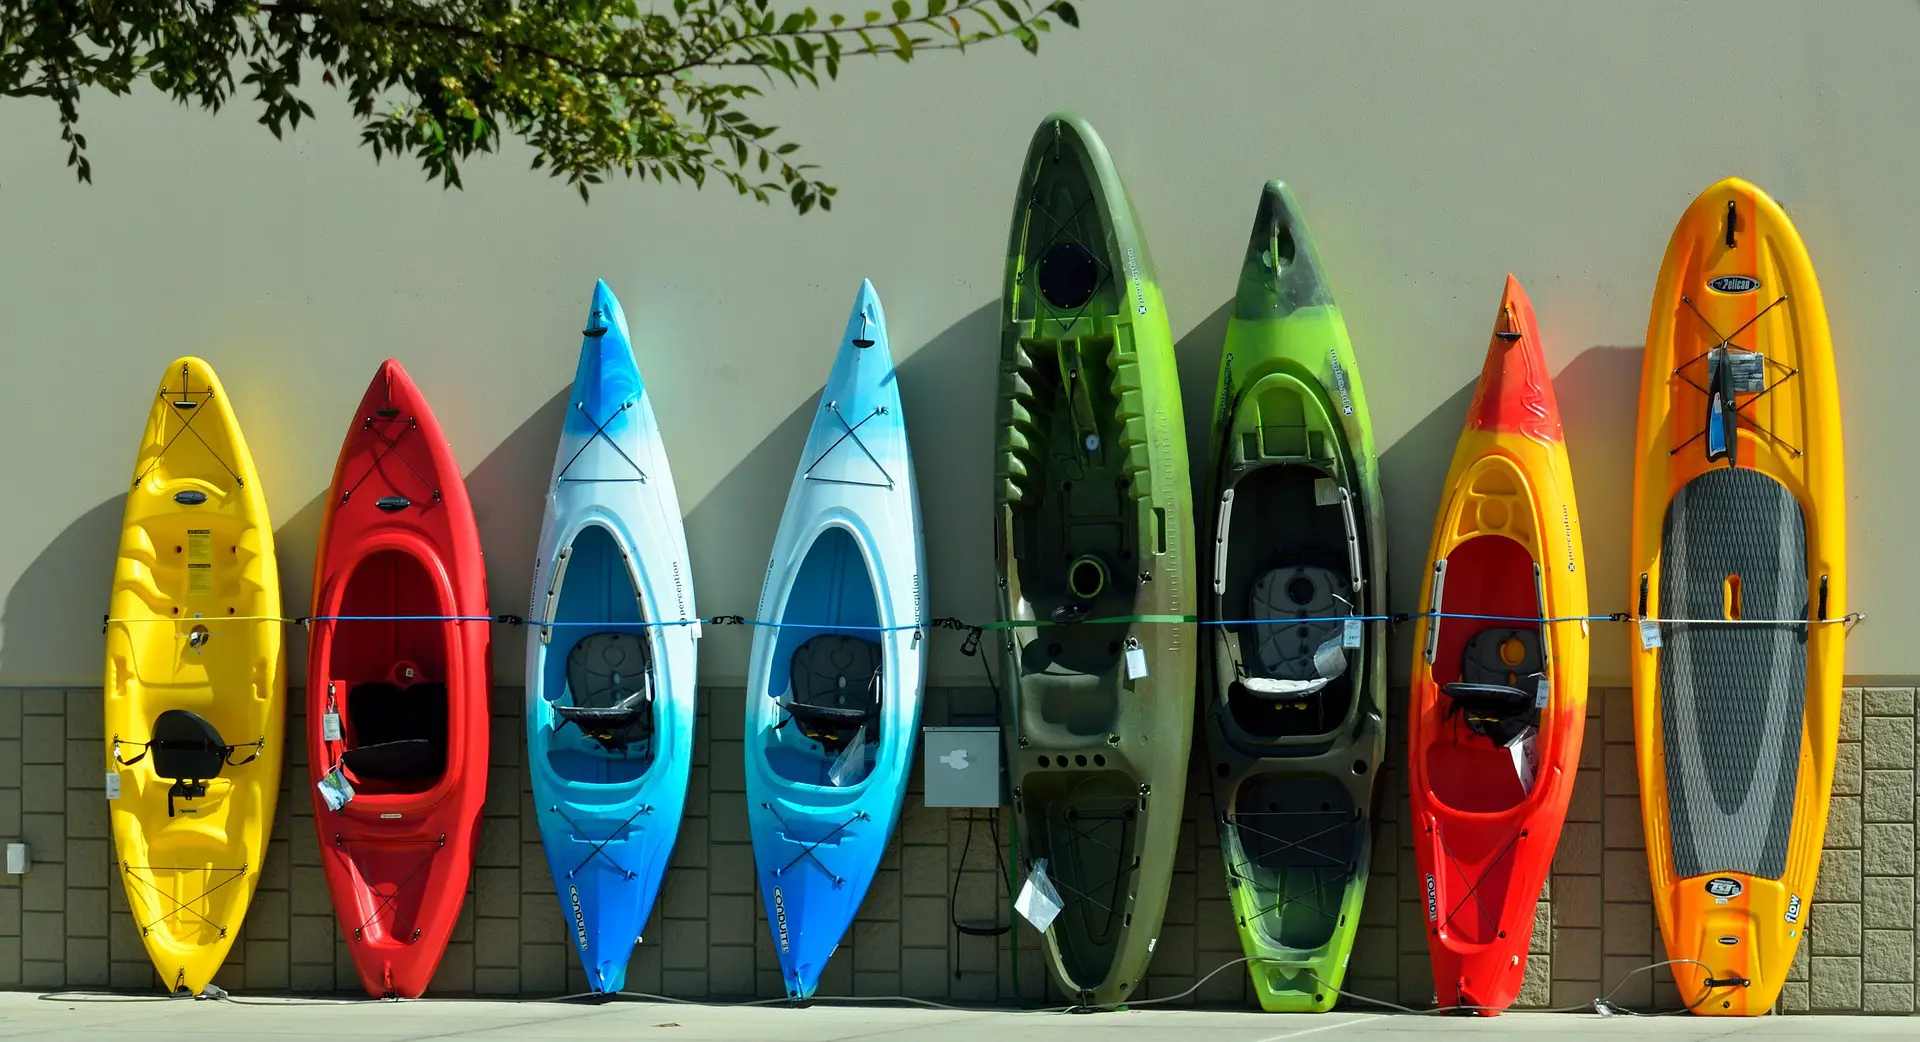 How to Store Kayaks in a Garage